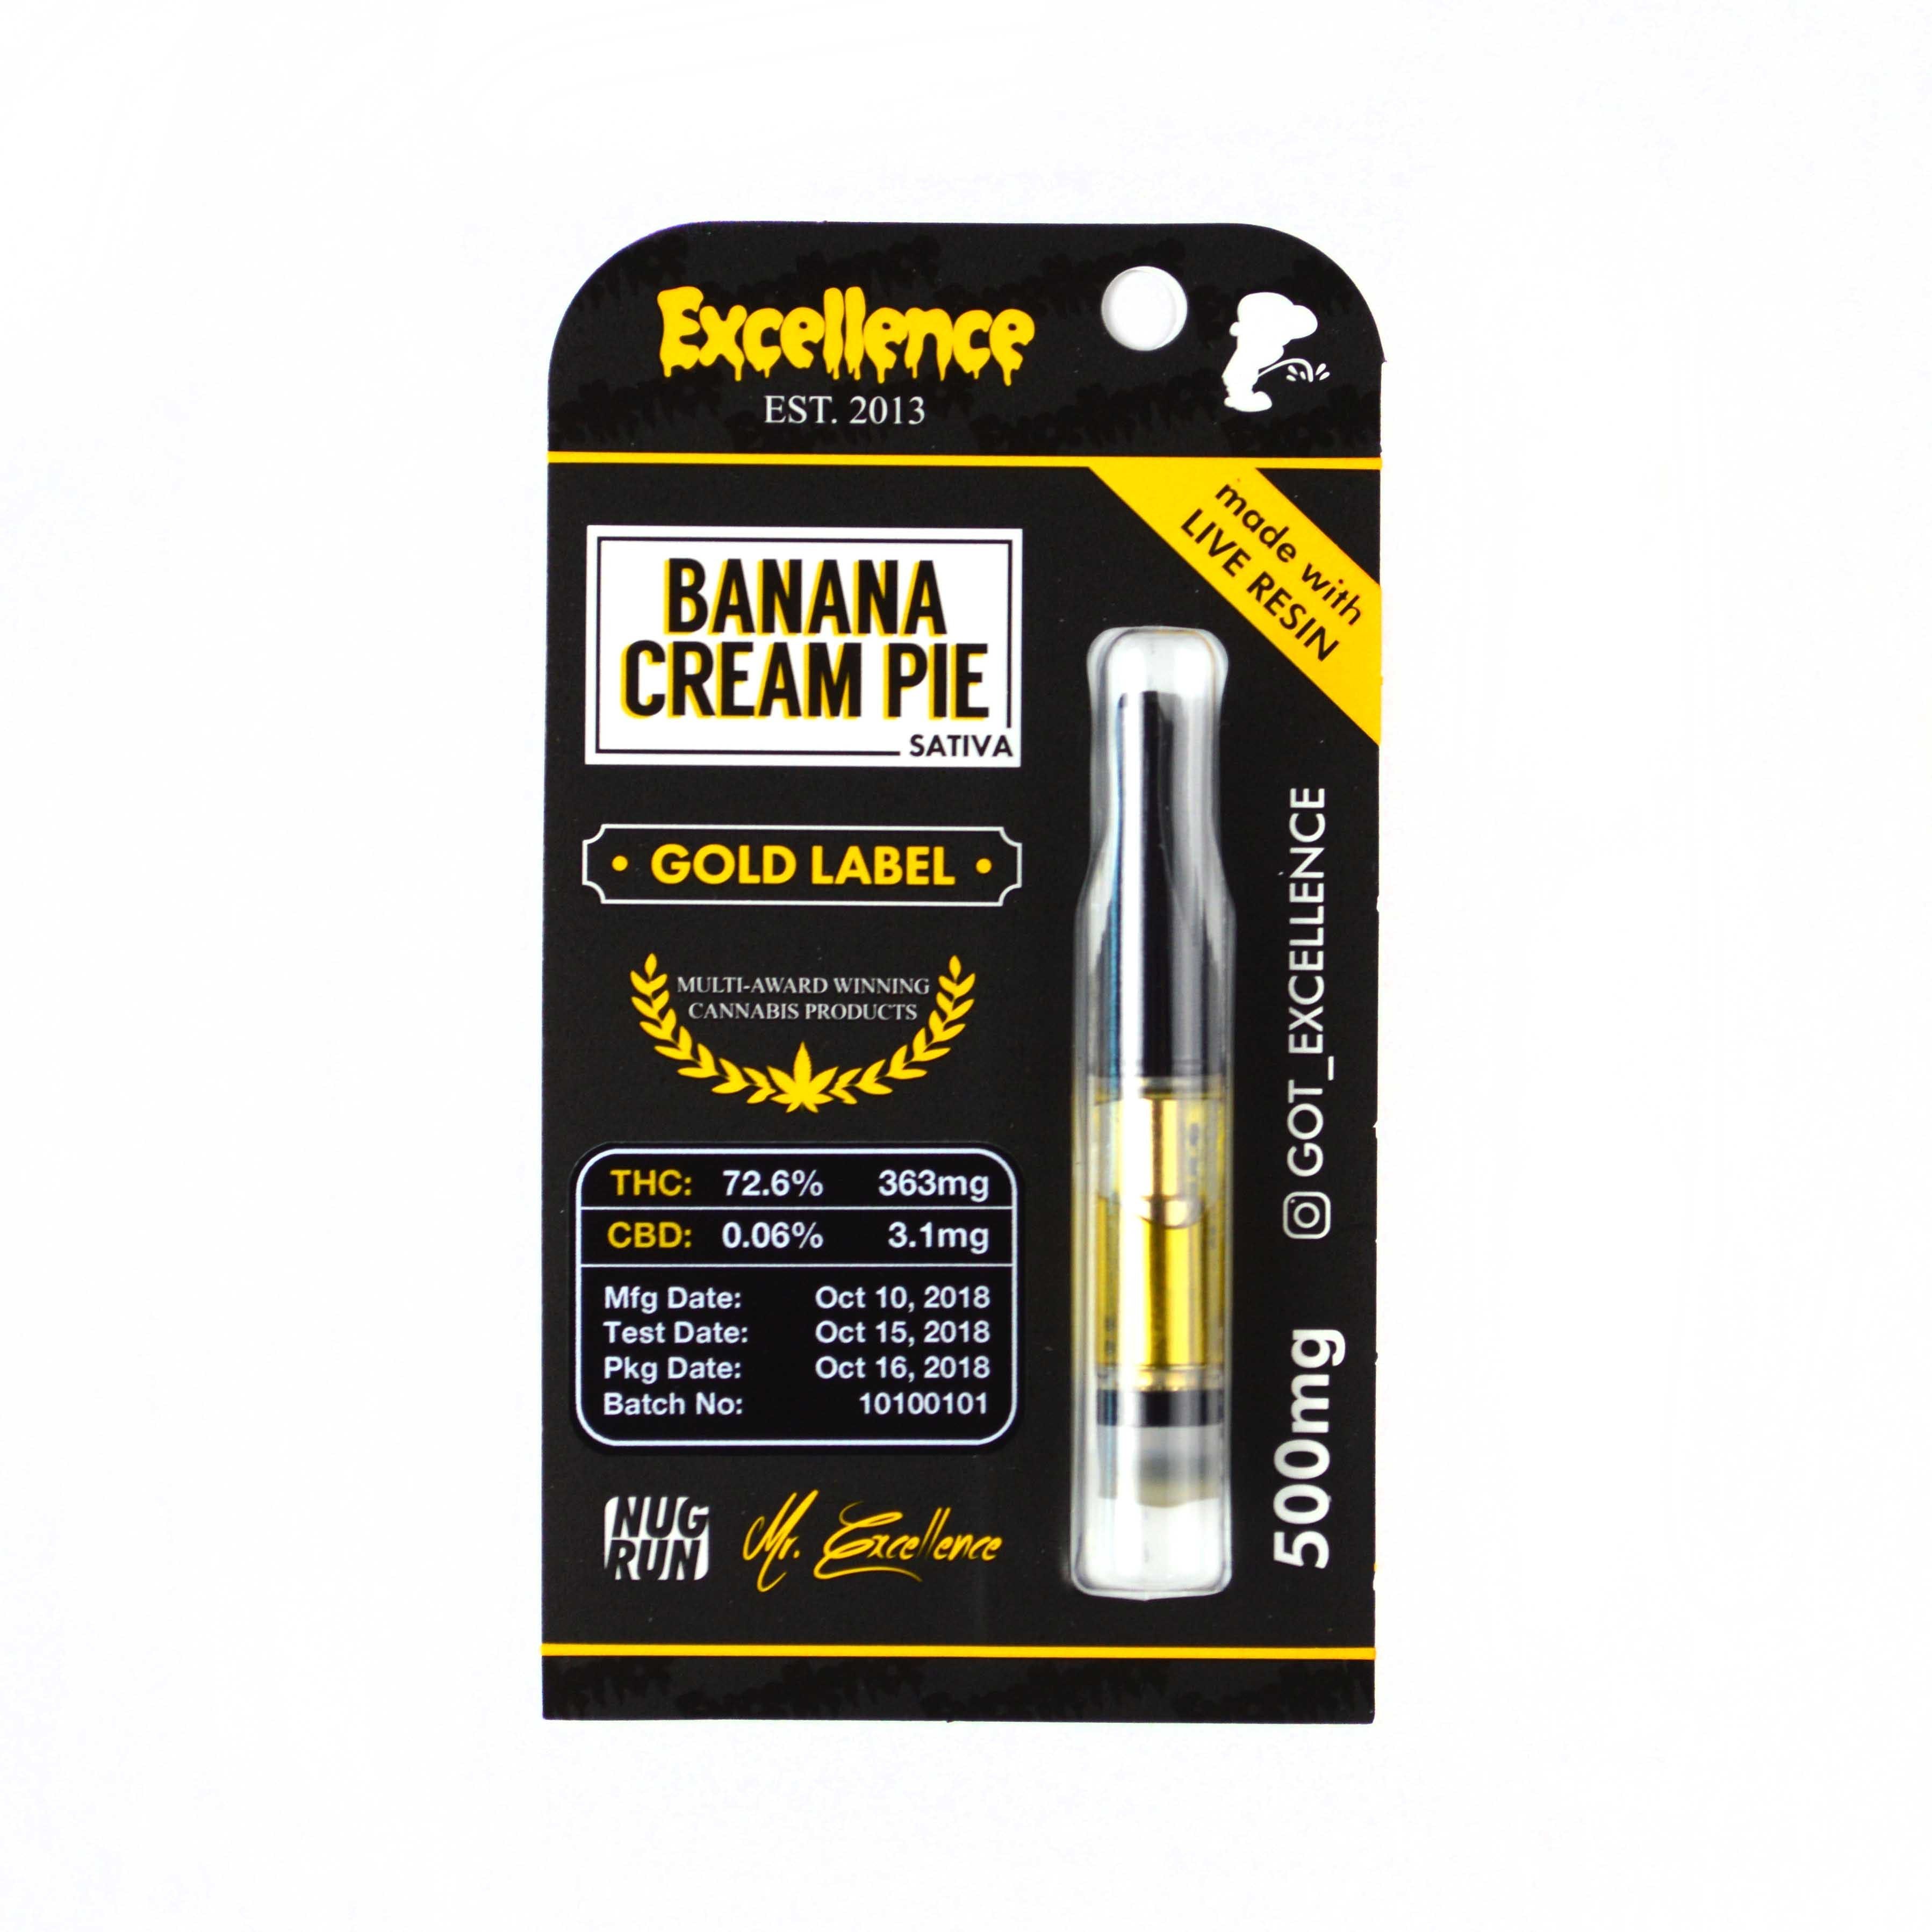 concentrate-excellence-banana-cream-pie-gold-label-cartridge